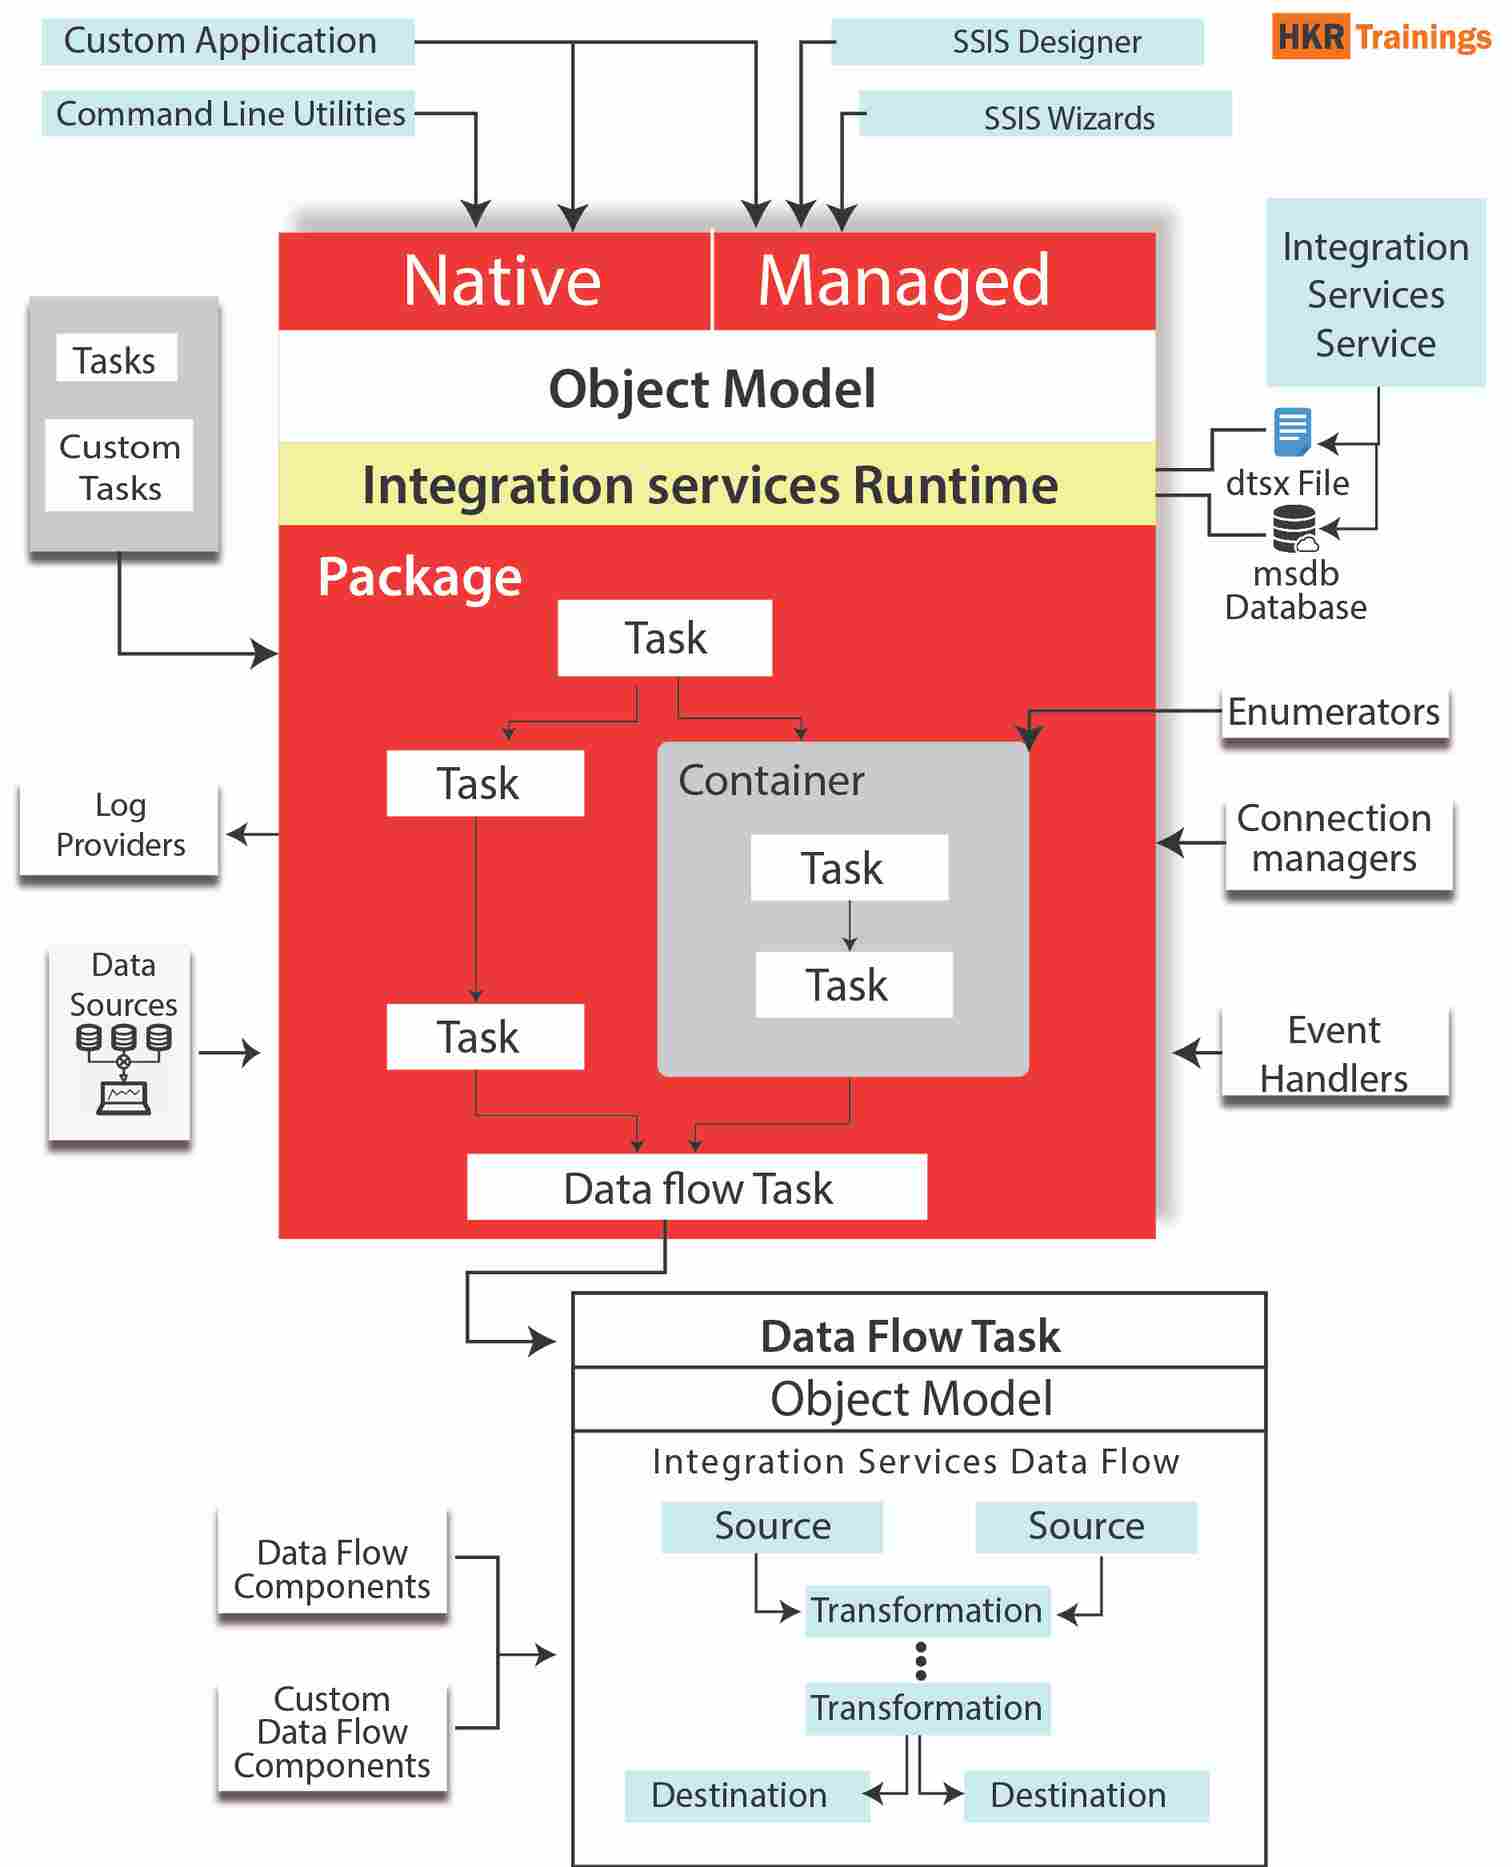 The SSIS Architecture.